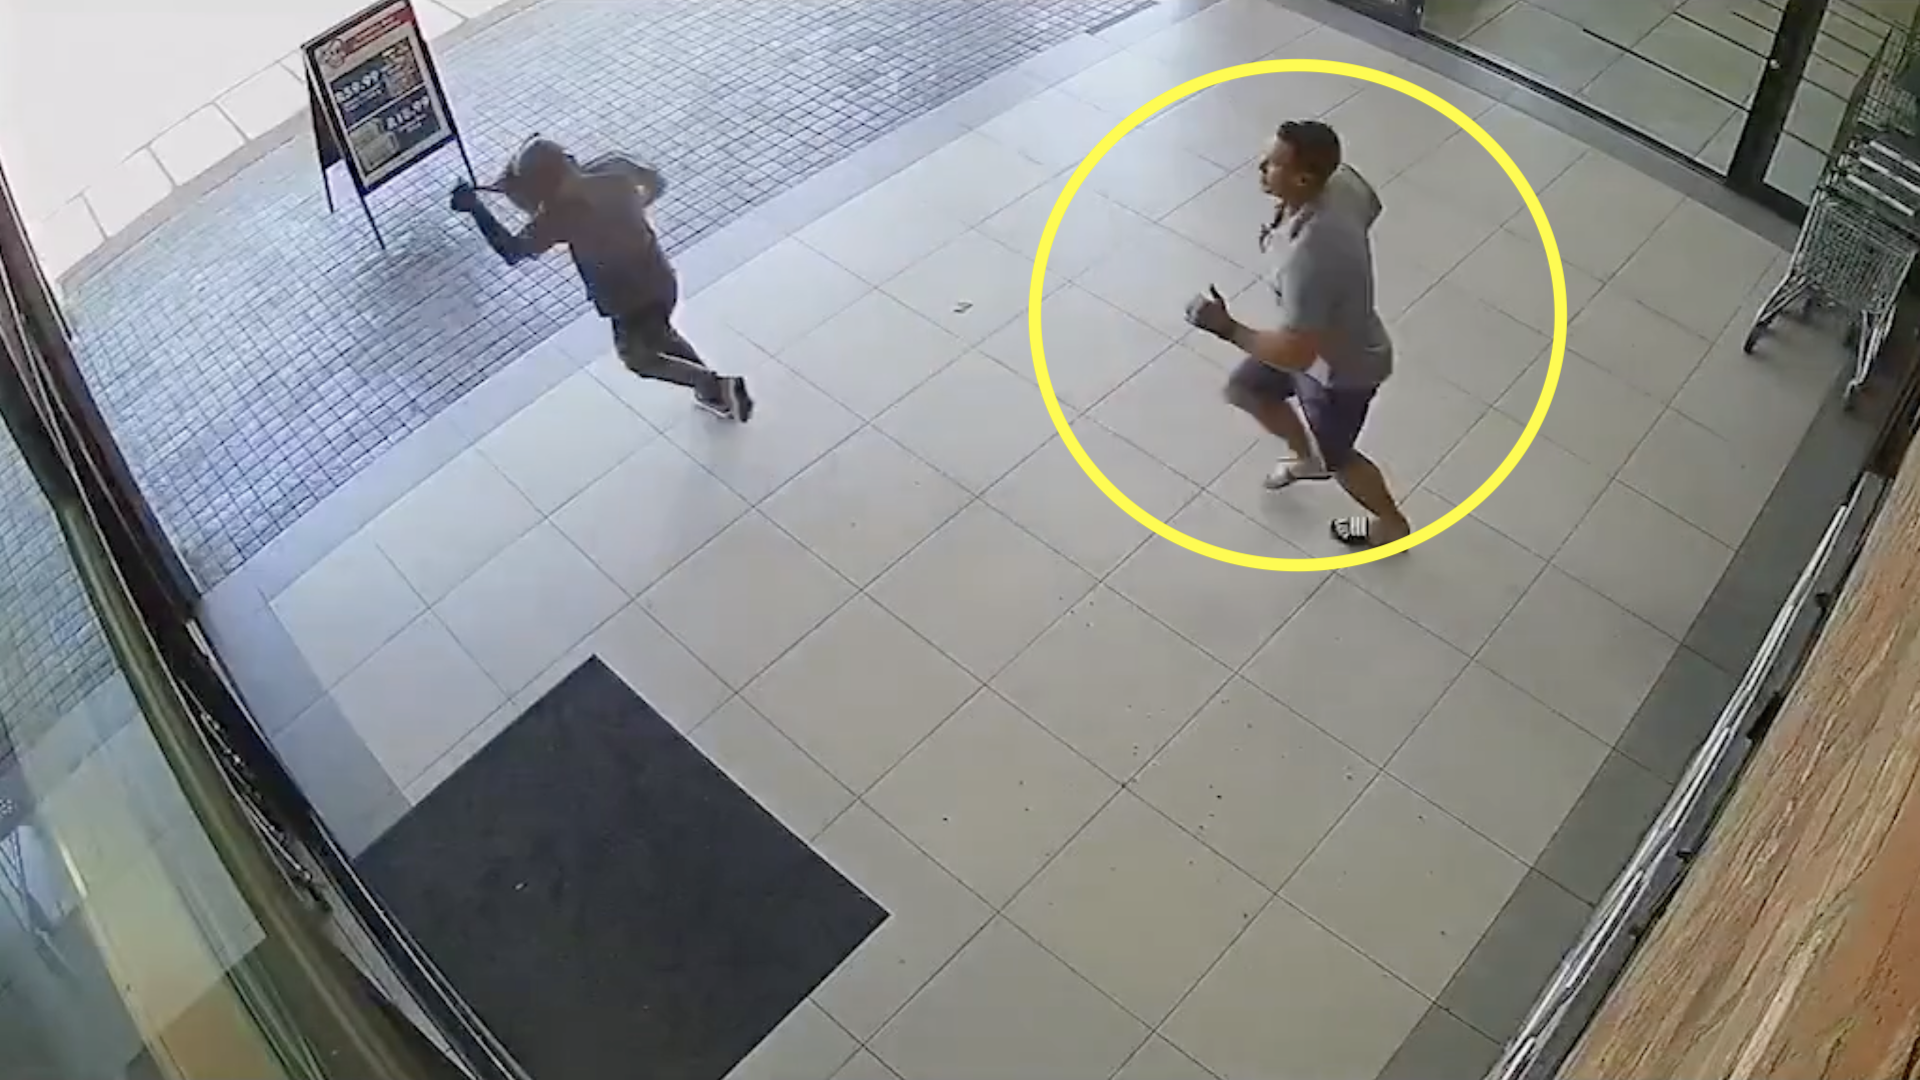 WATCH: Springbok legend chases and catches shoplifter